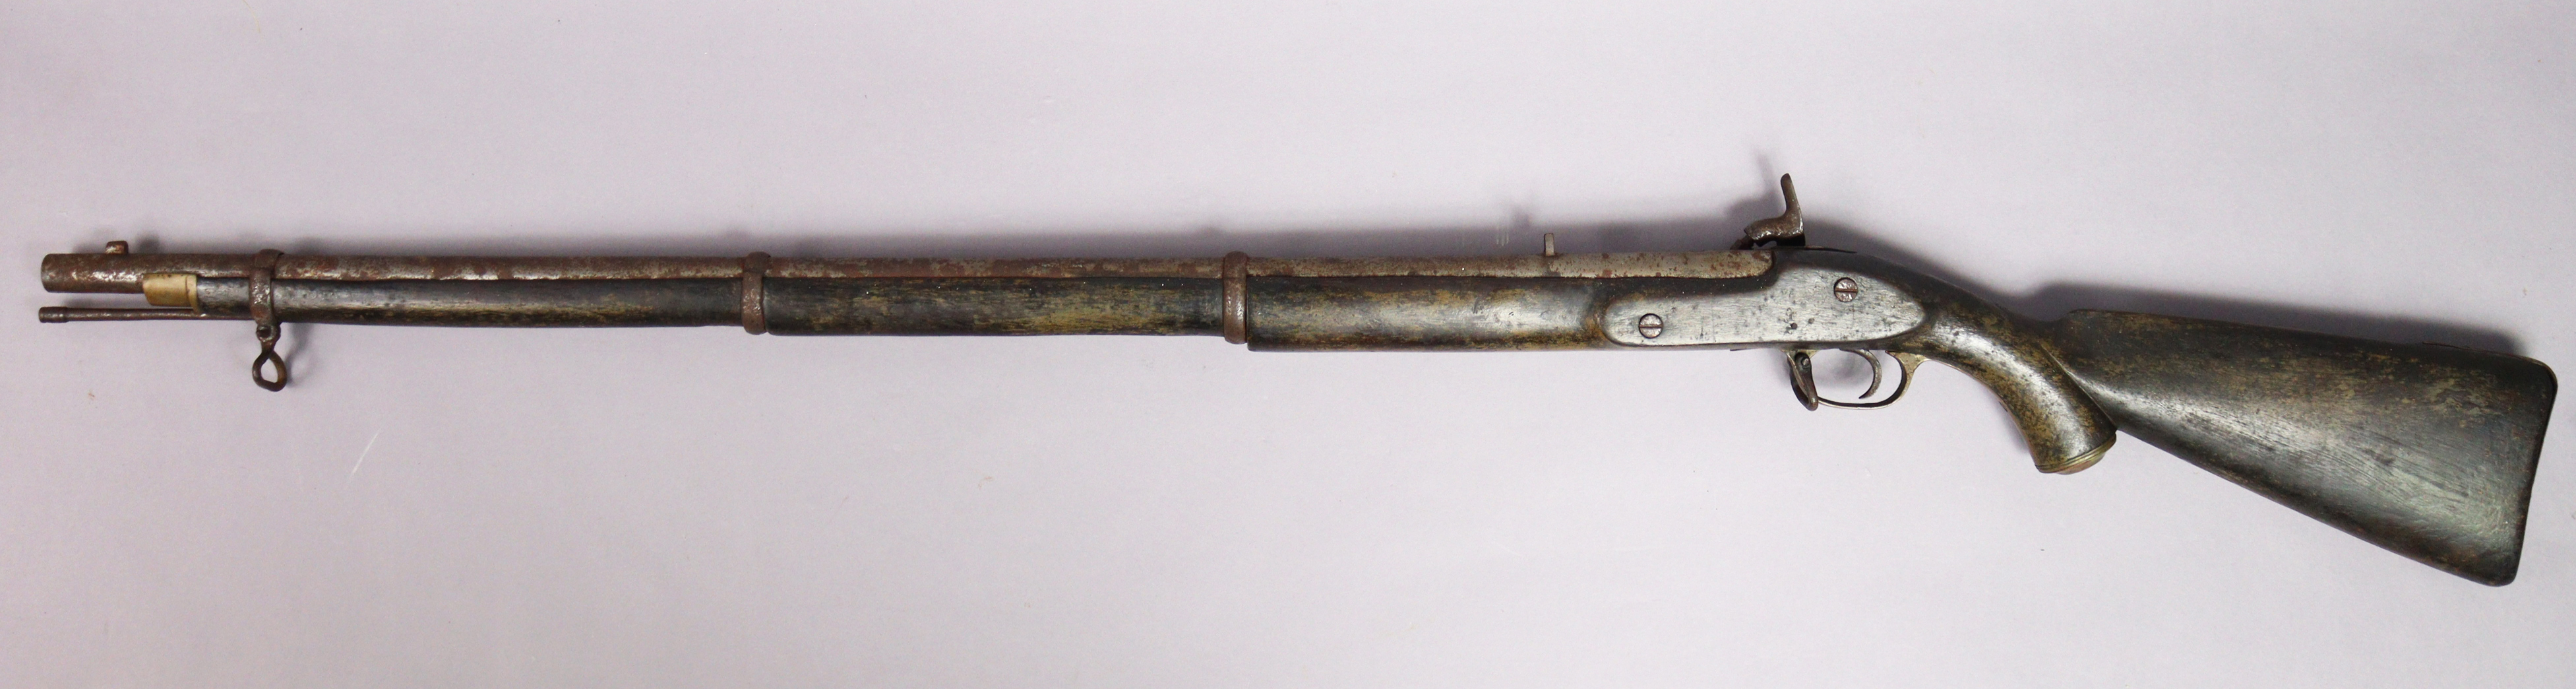 A mid-19th century three-band Indian Enfield musket, the 88cm plain steel barrel inscribed “V.R.T.G” - Image 9 of 9